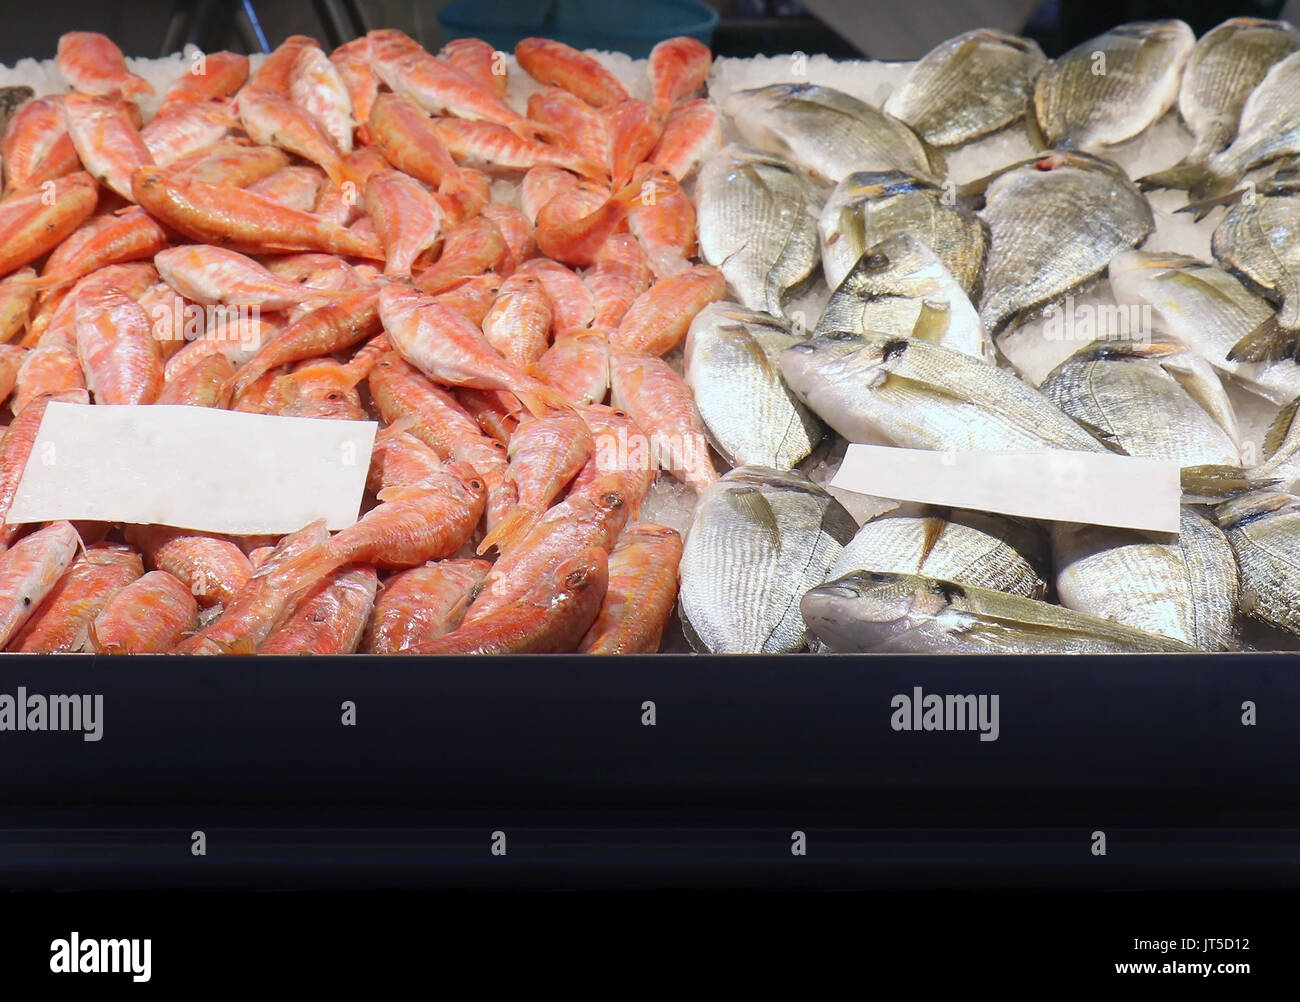 Pile of fresh sea fish and shrimps on ice sold on market stall Stock Photo